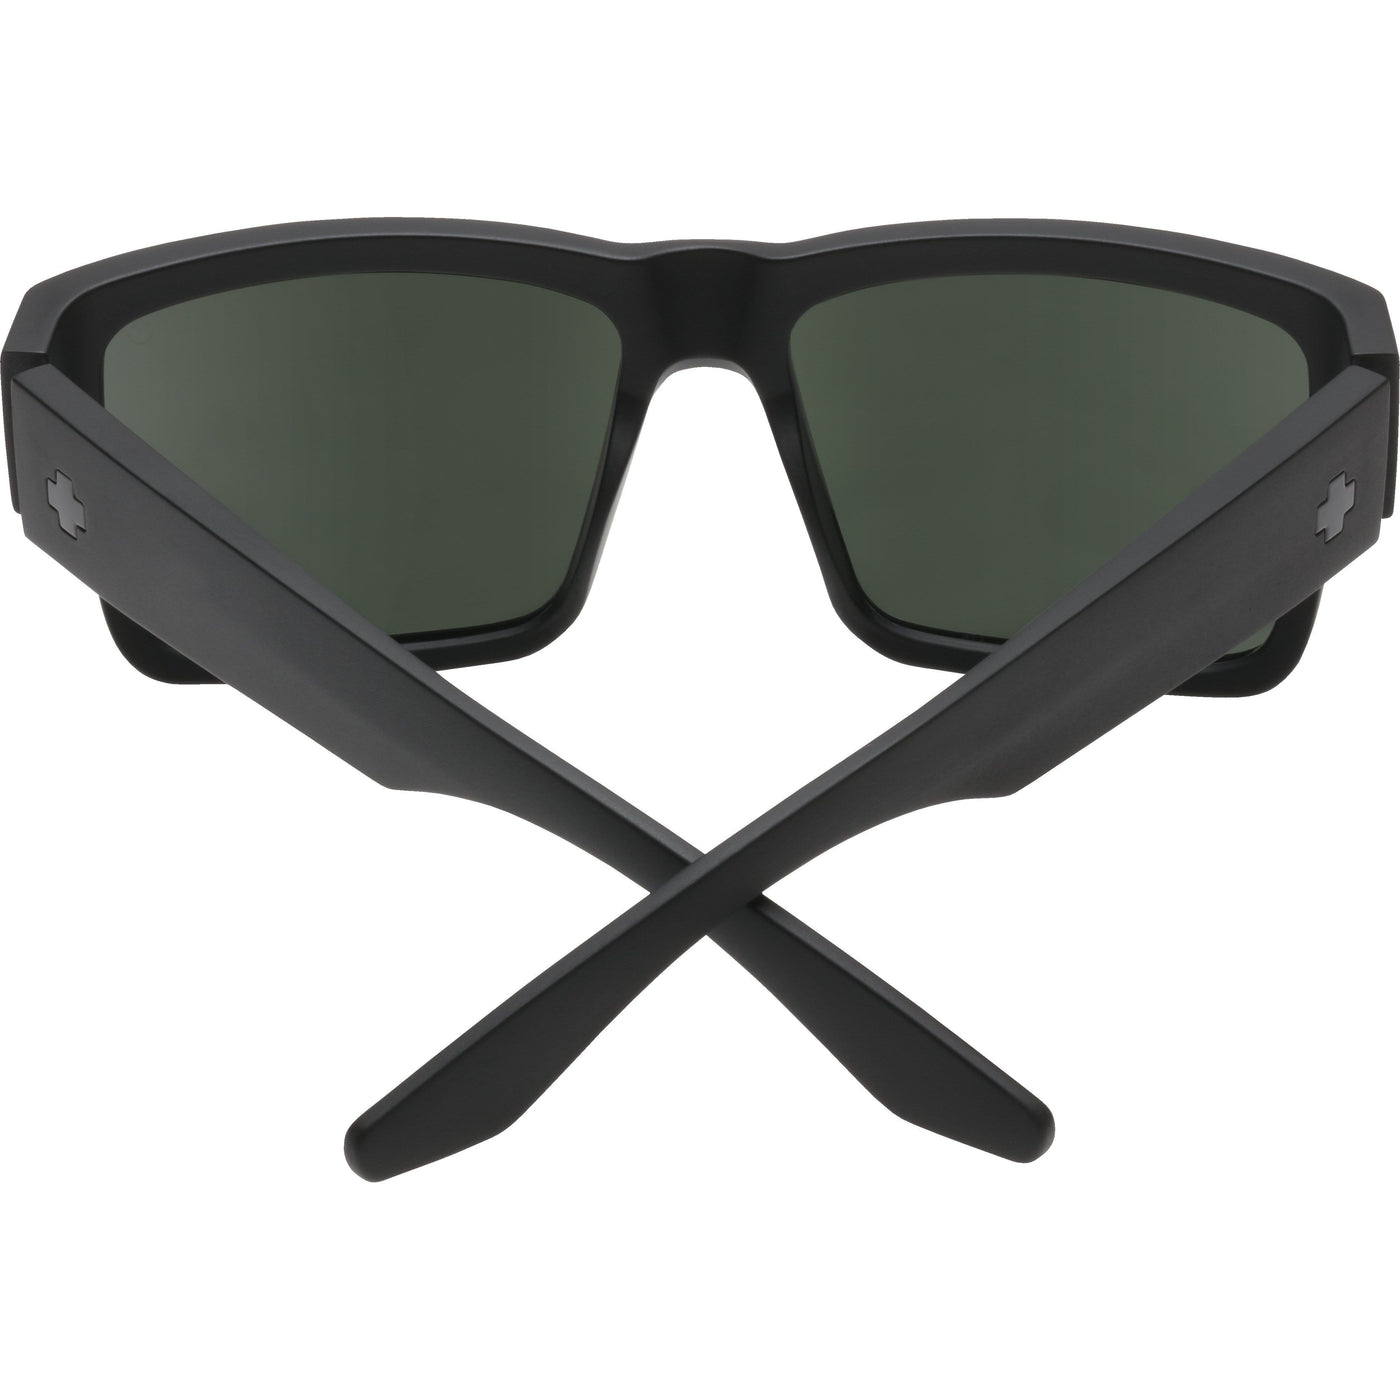 SPY CYRUS Sunglasses, Happy Lens - Gray/Green 8Lines Shop - Fast Shipping